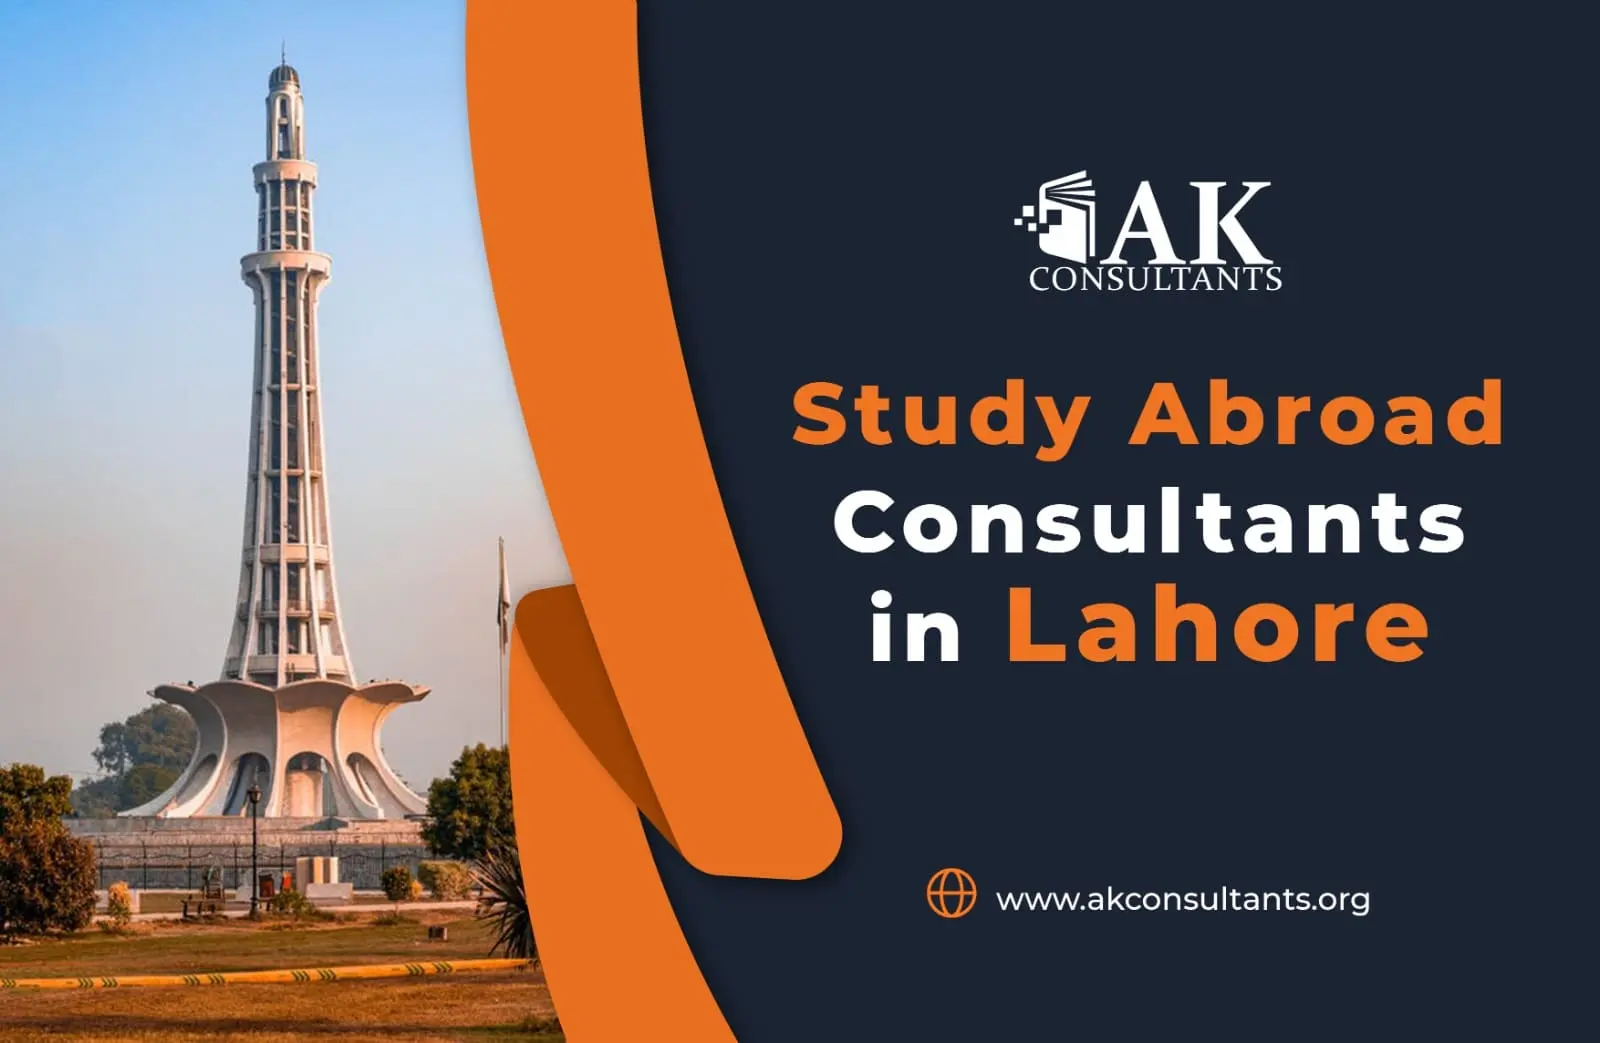 Study Abroad Consultants in Lahore written with AK consultant logo and image of Lahore Office.